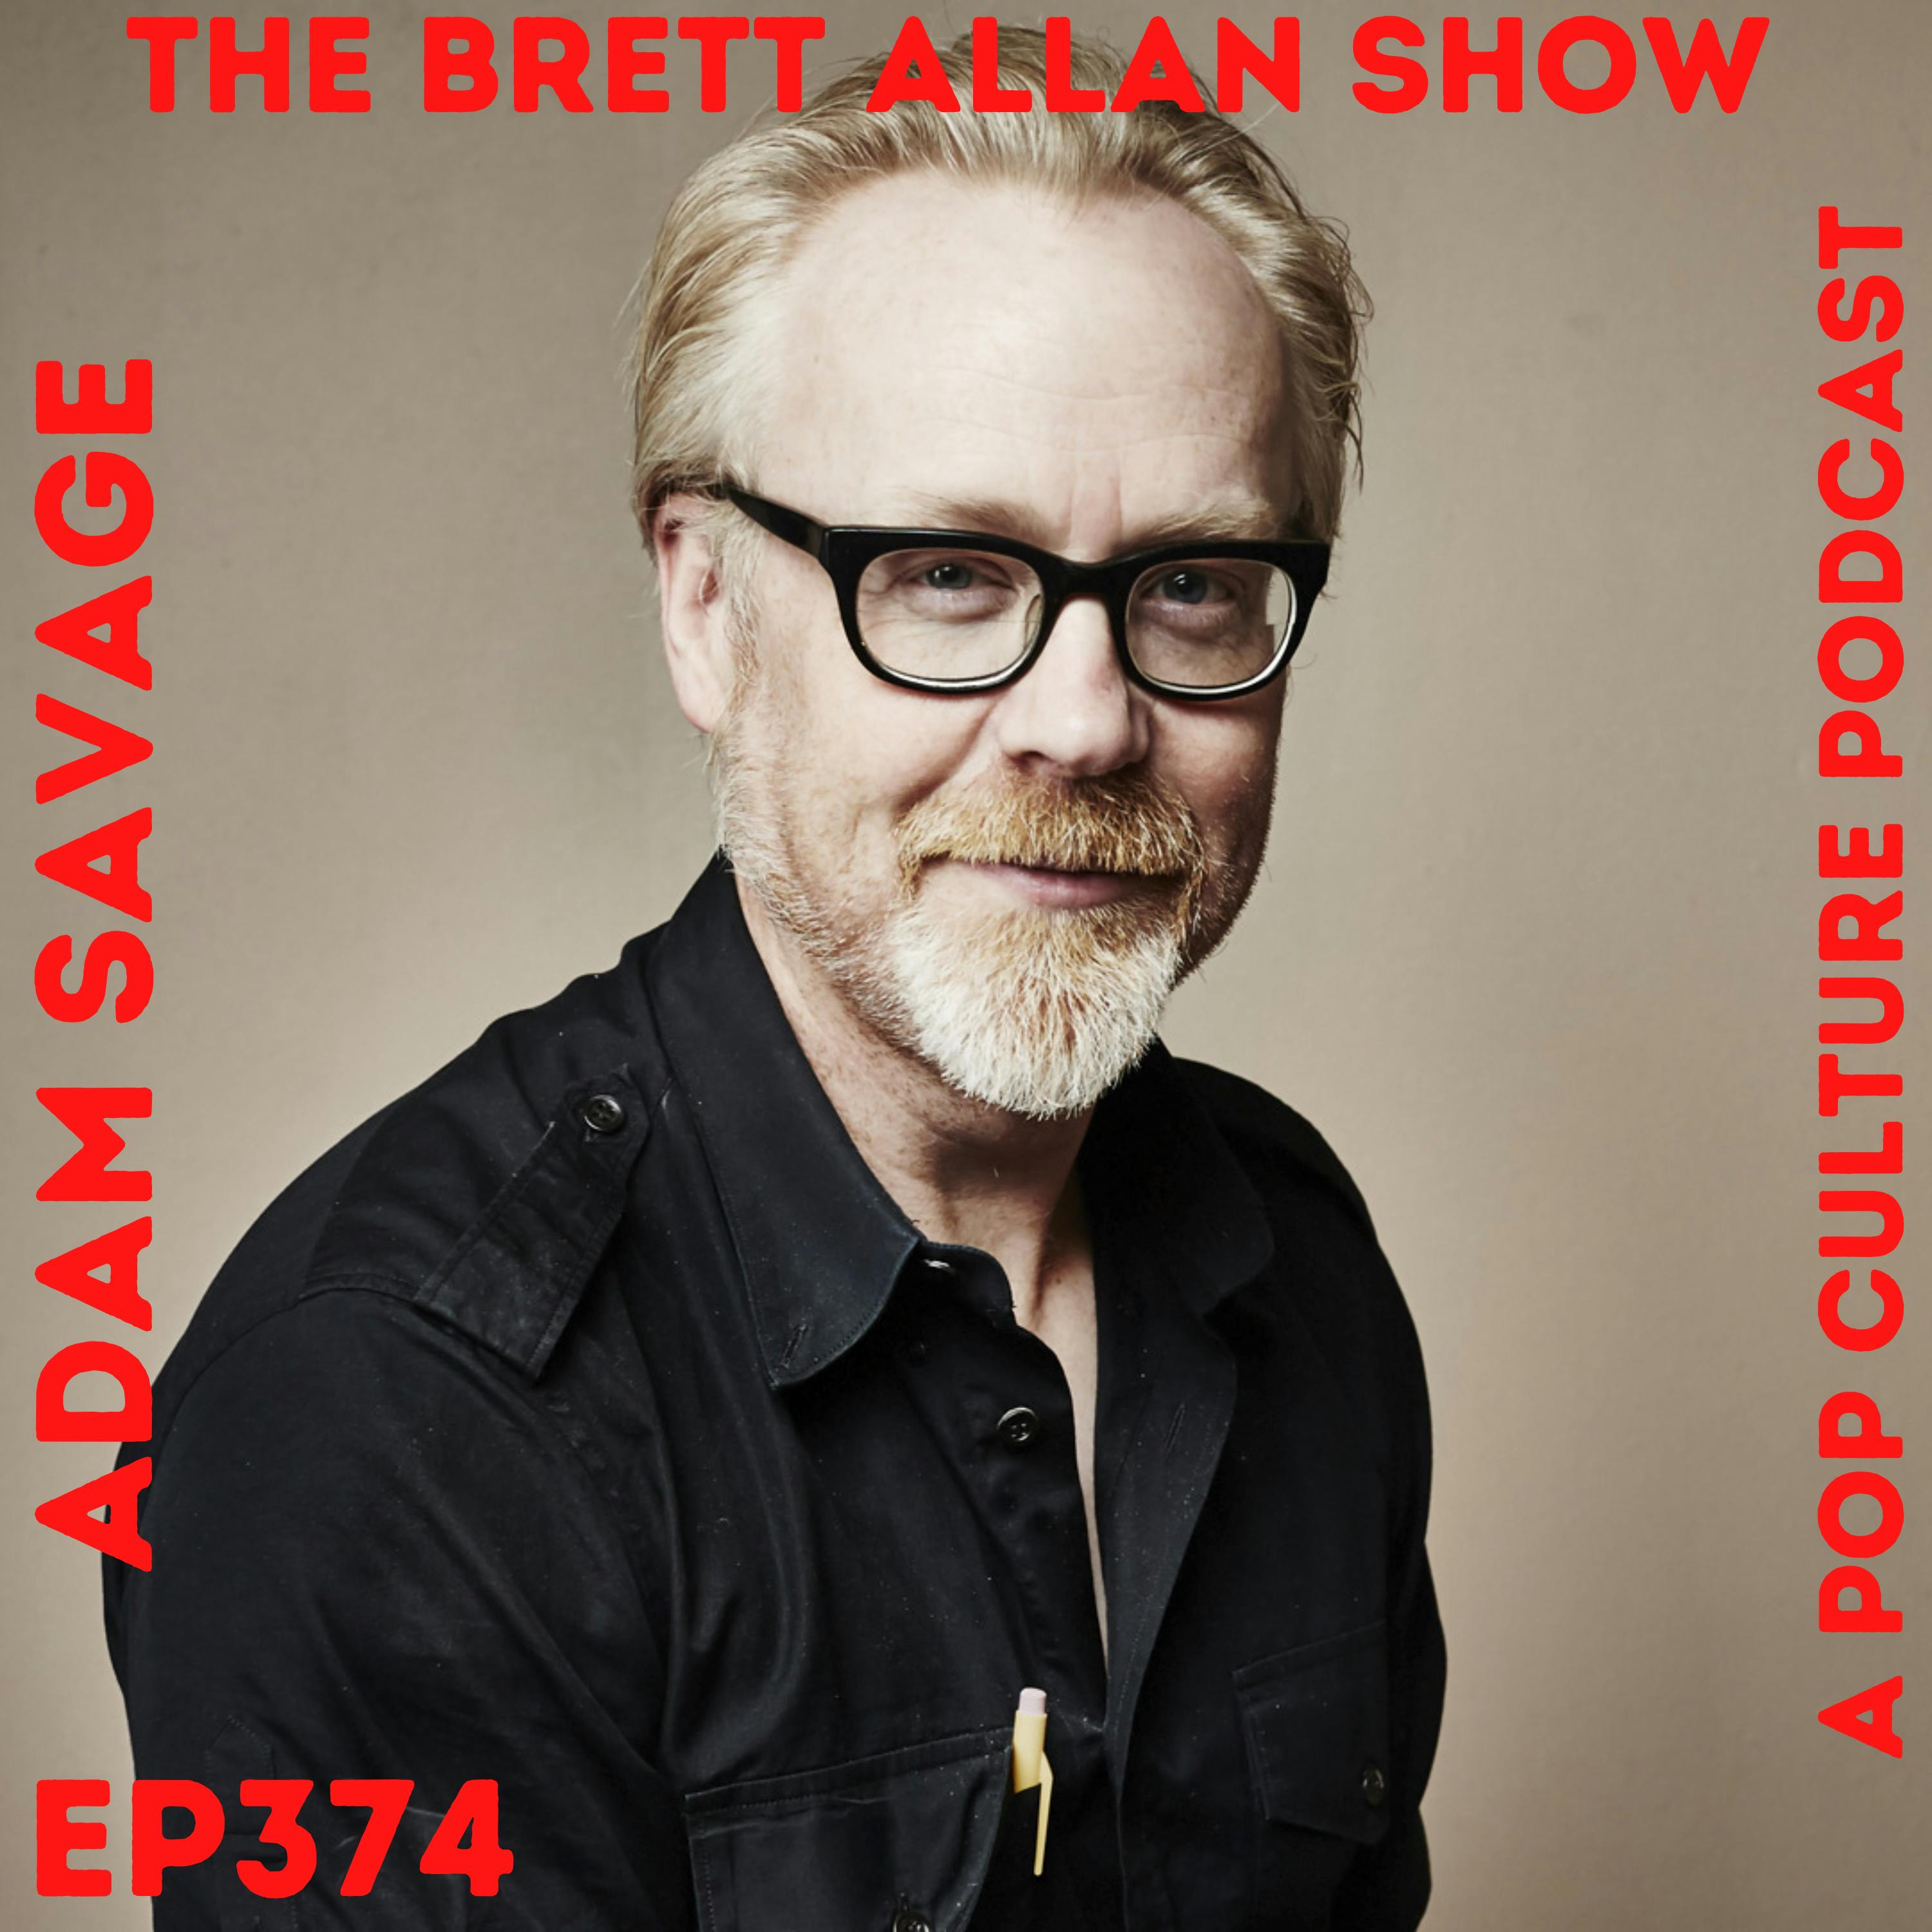 Adam Savage Talks "SILICON" August 27-28, 2022 At The San Jose McEnery Convention Center and More Image